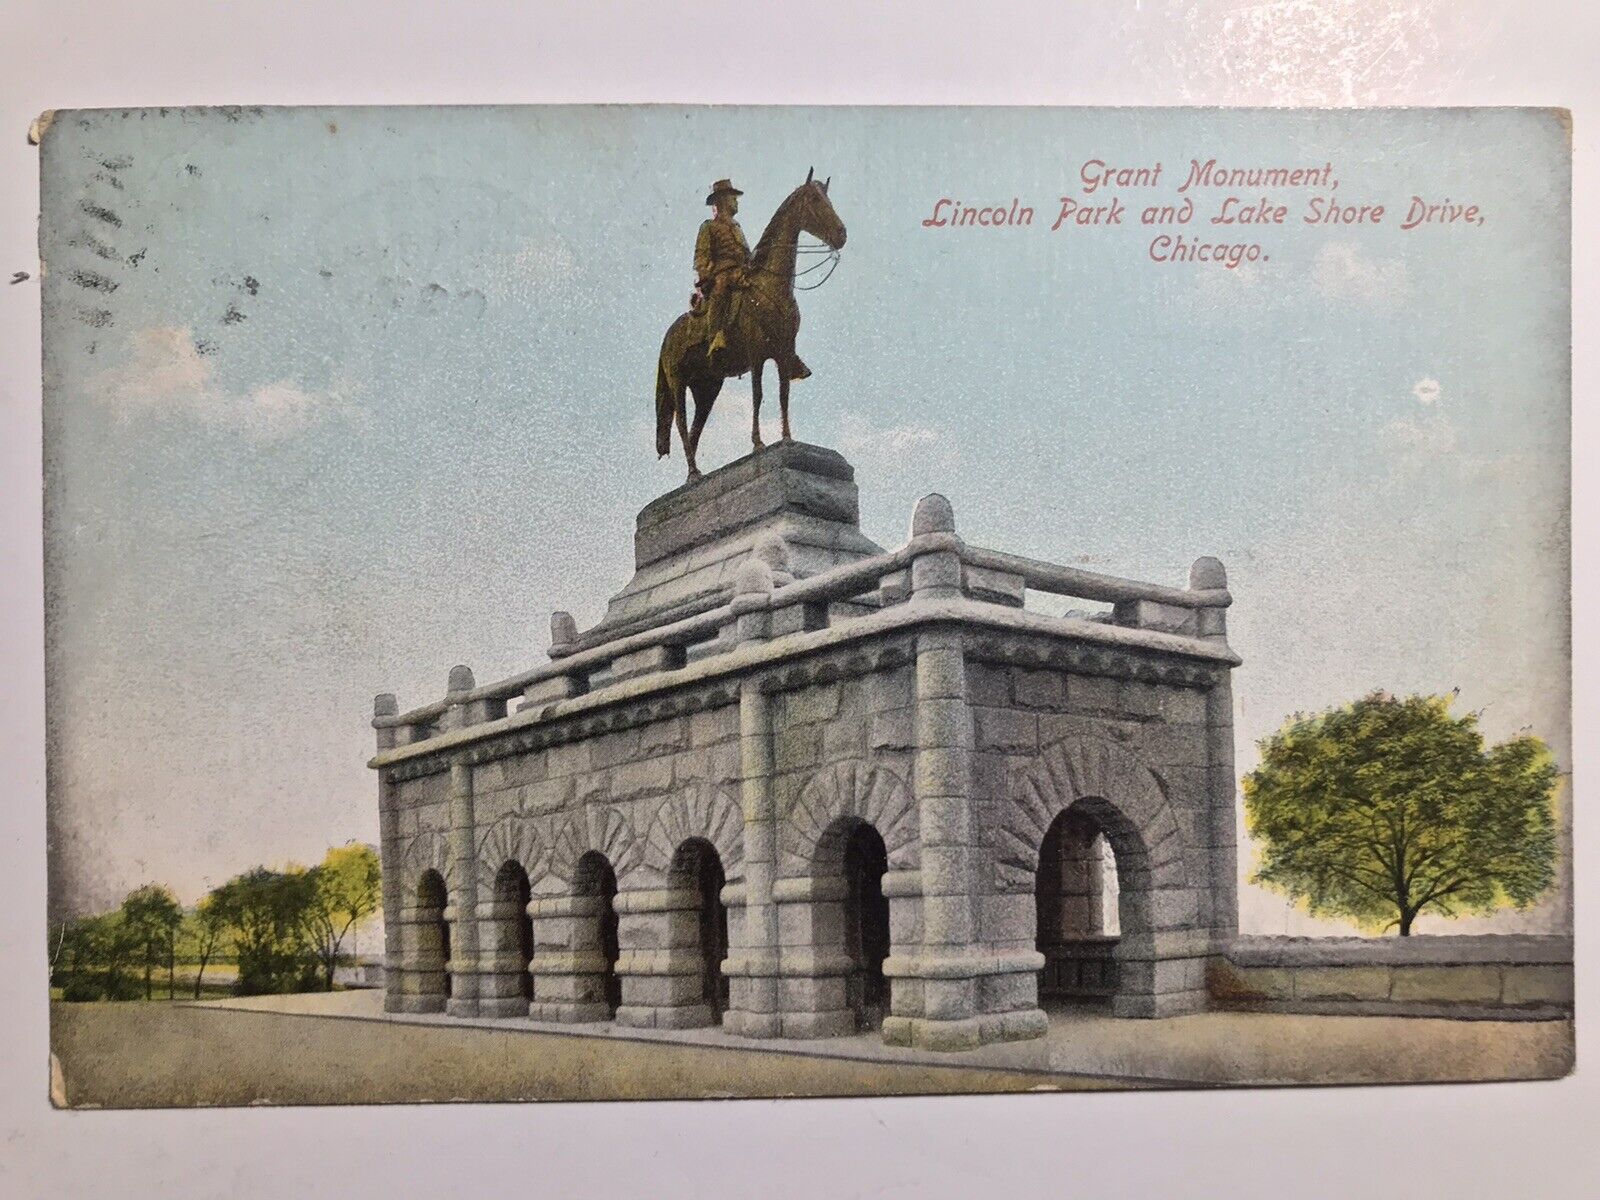 1909 Grant Monument Lincoln Park And Lake Shore Drive Chicago Postcard